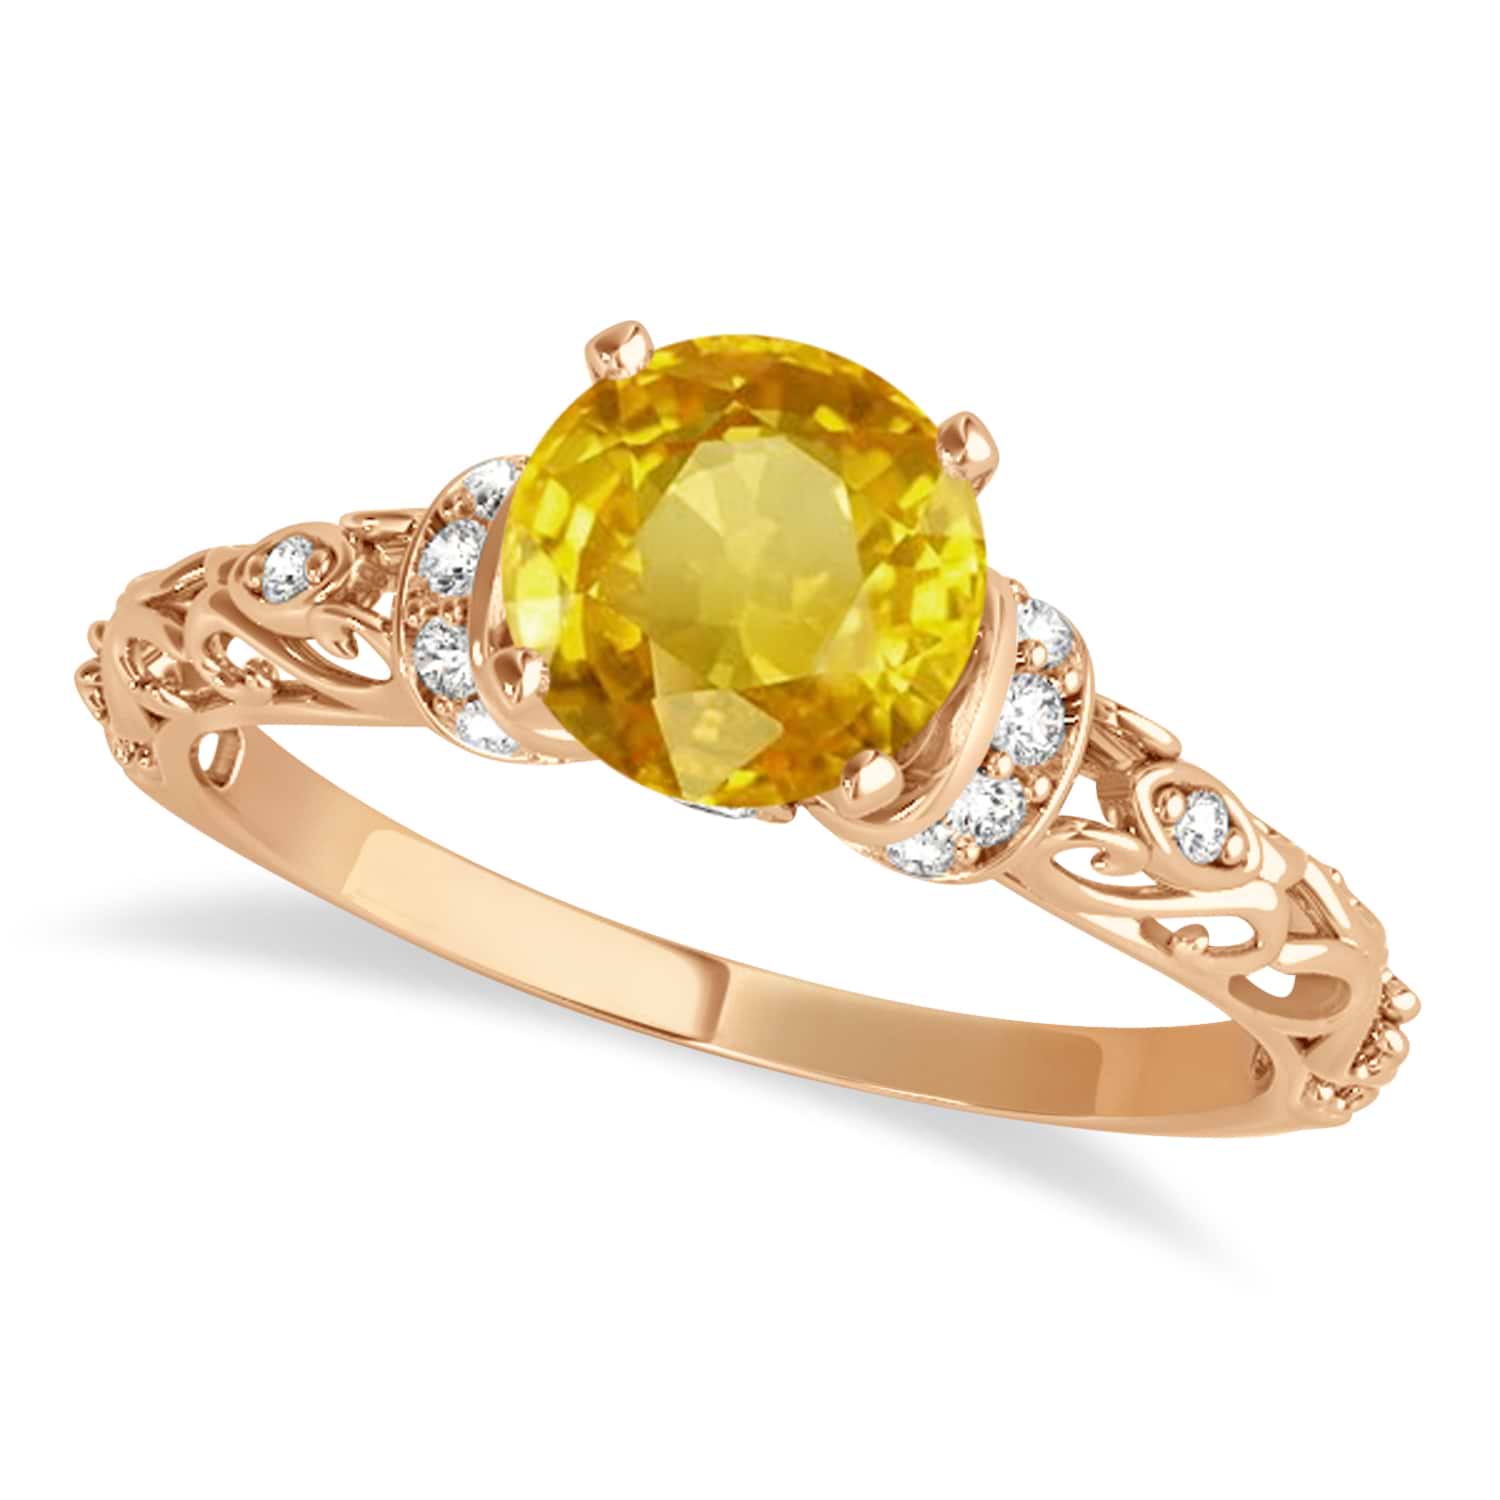 Yellow Sapphire & Diamond Antique Style Engagement Ring 14k Rose Gold (1.12ct)